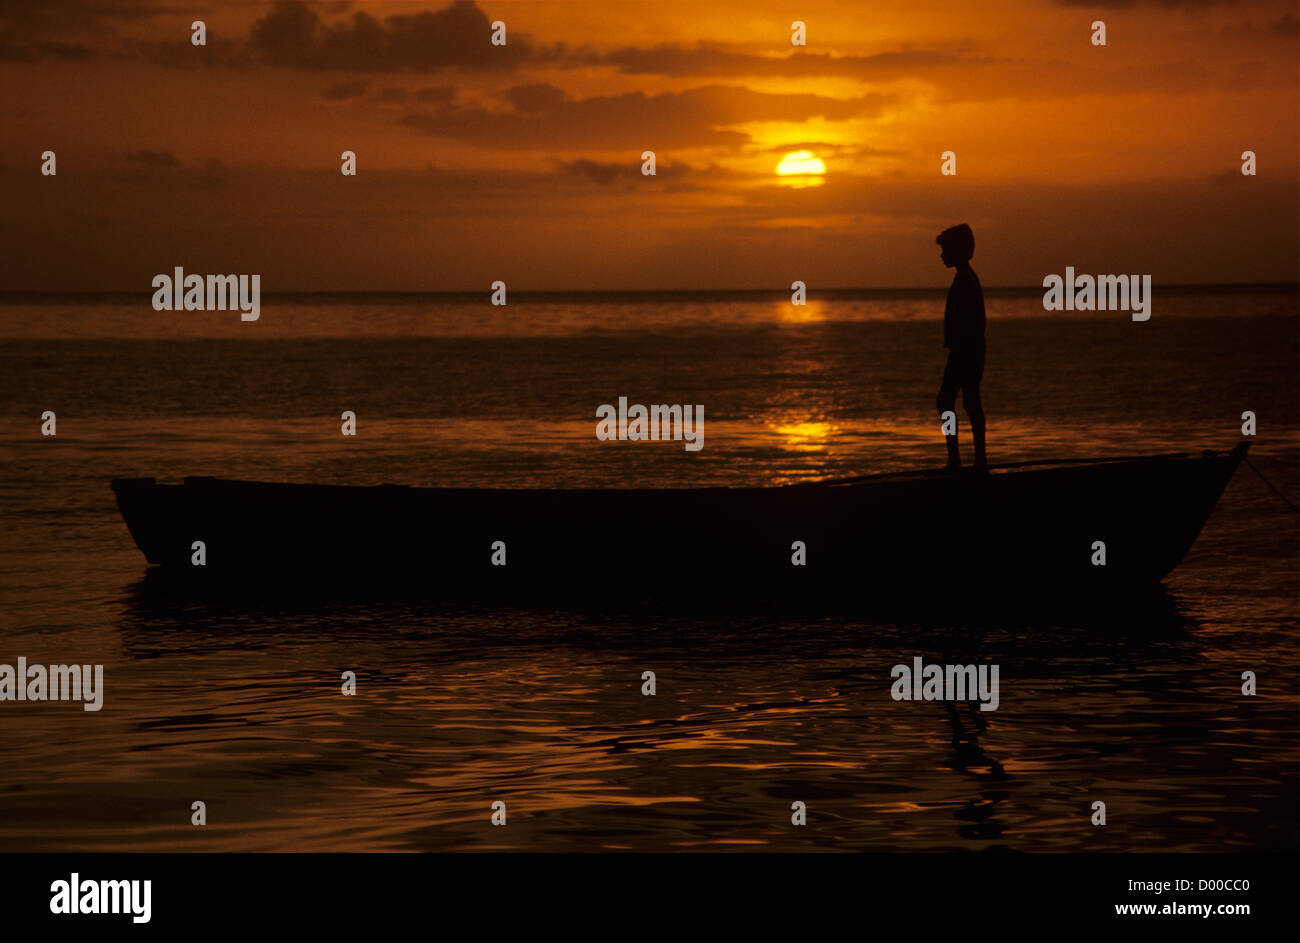 Young boy on boat at sunset, Fiji. Stock Photo